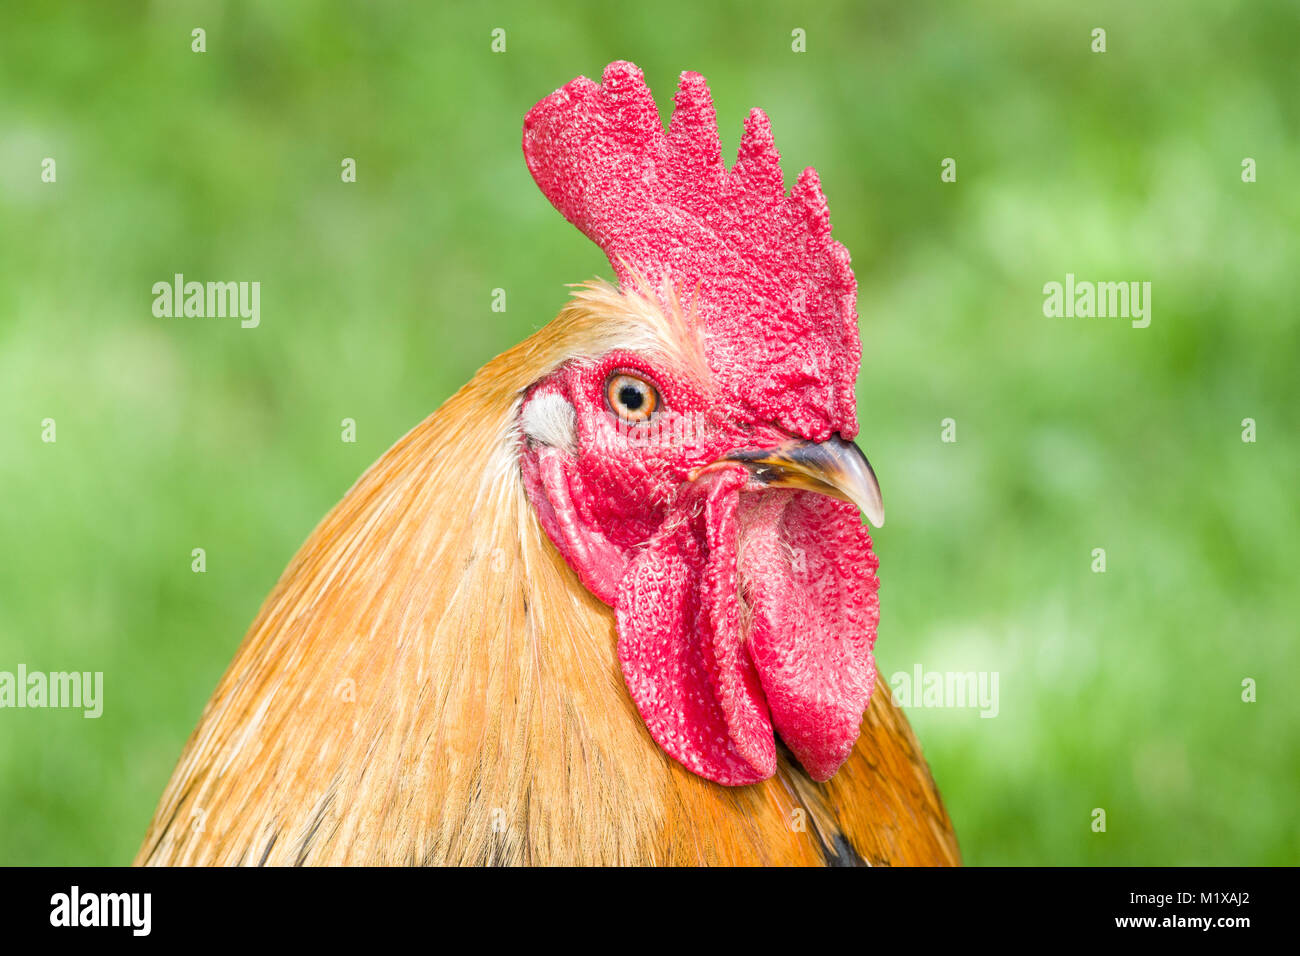 Portrait of rooster. Stock Photo